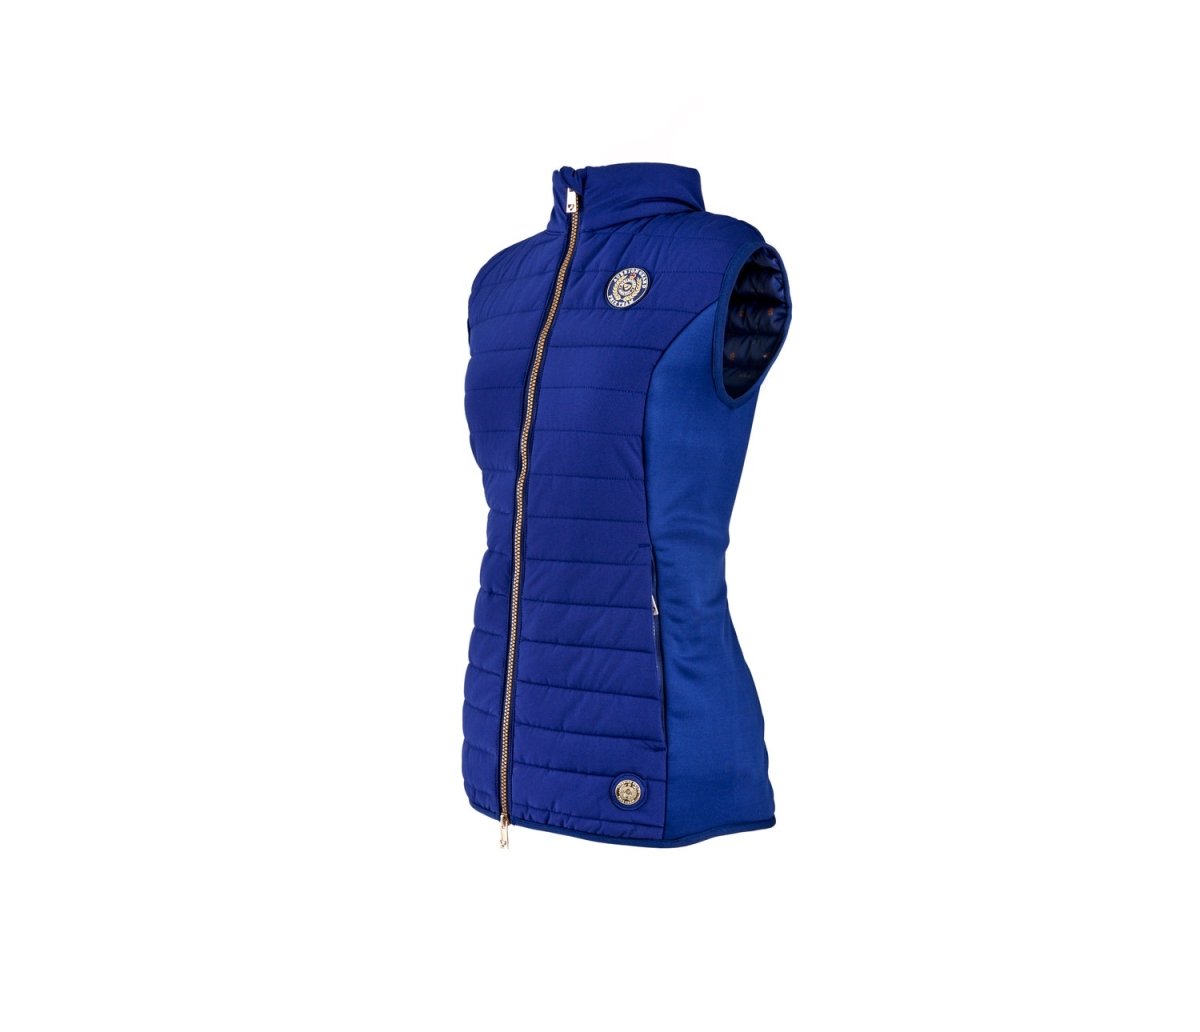 Aubrion SS24 Team Gilet - Young Rider - Black - 7/8 Years